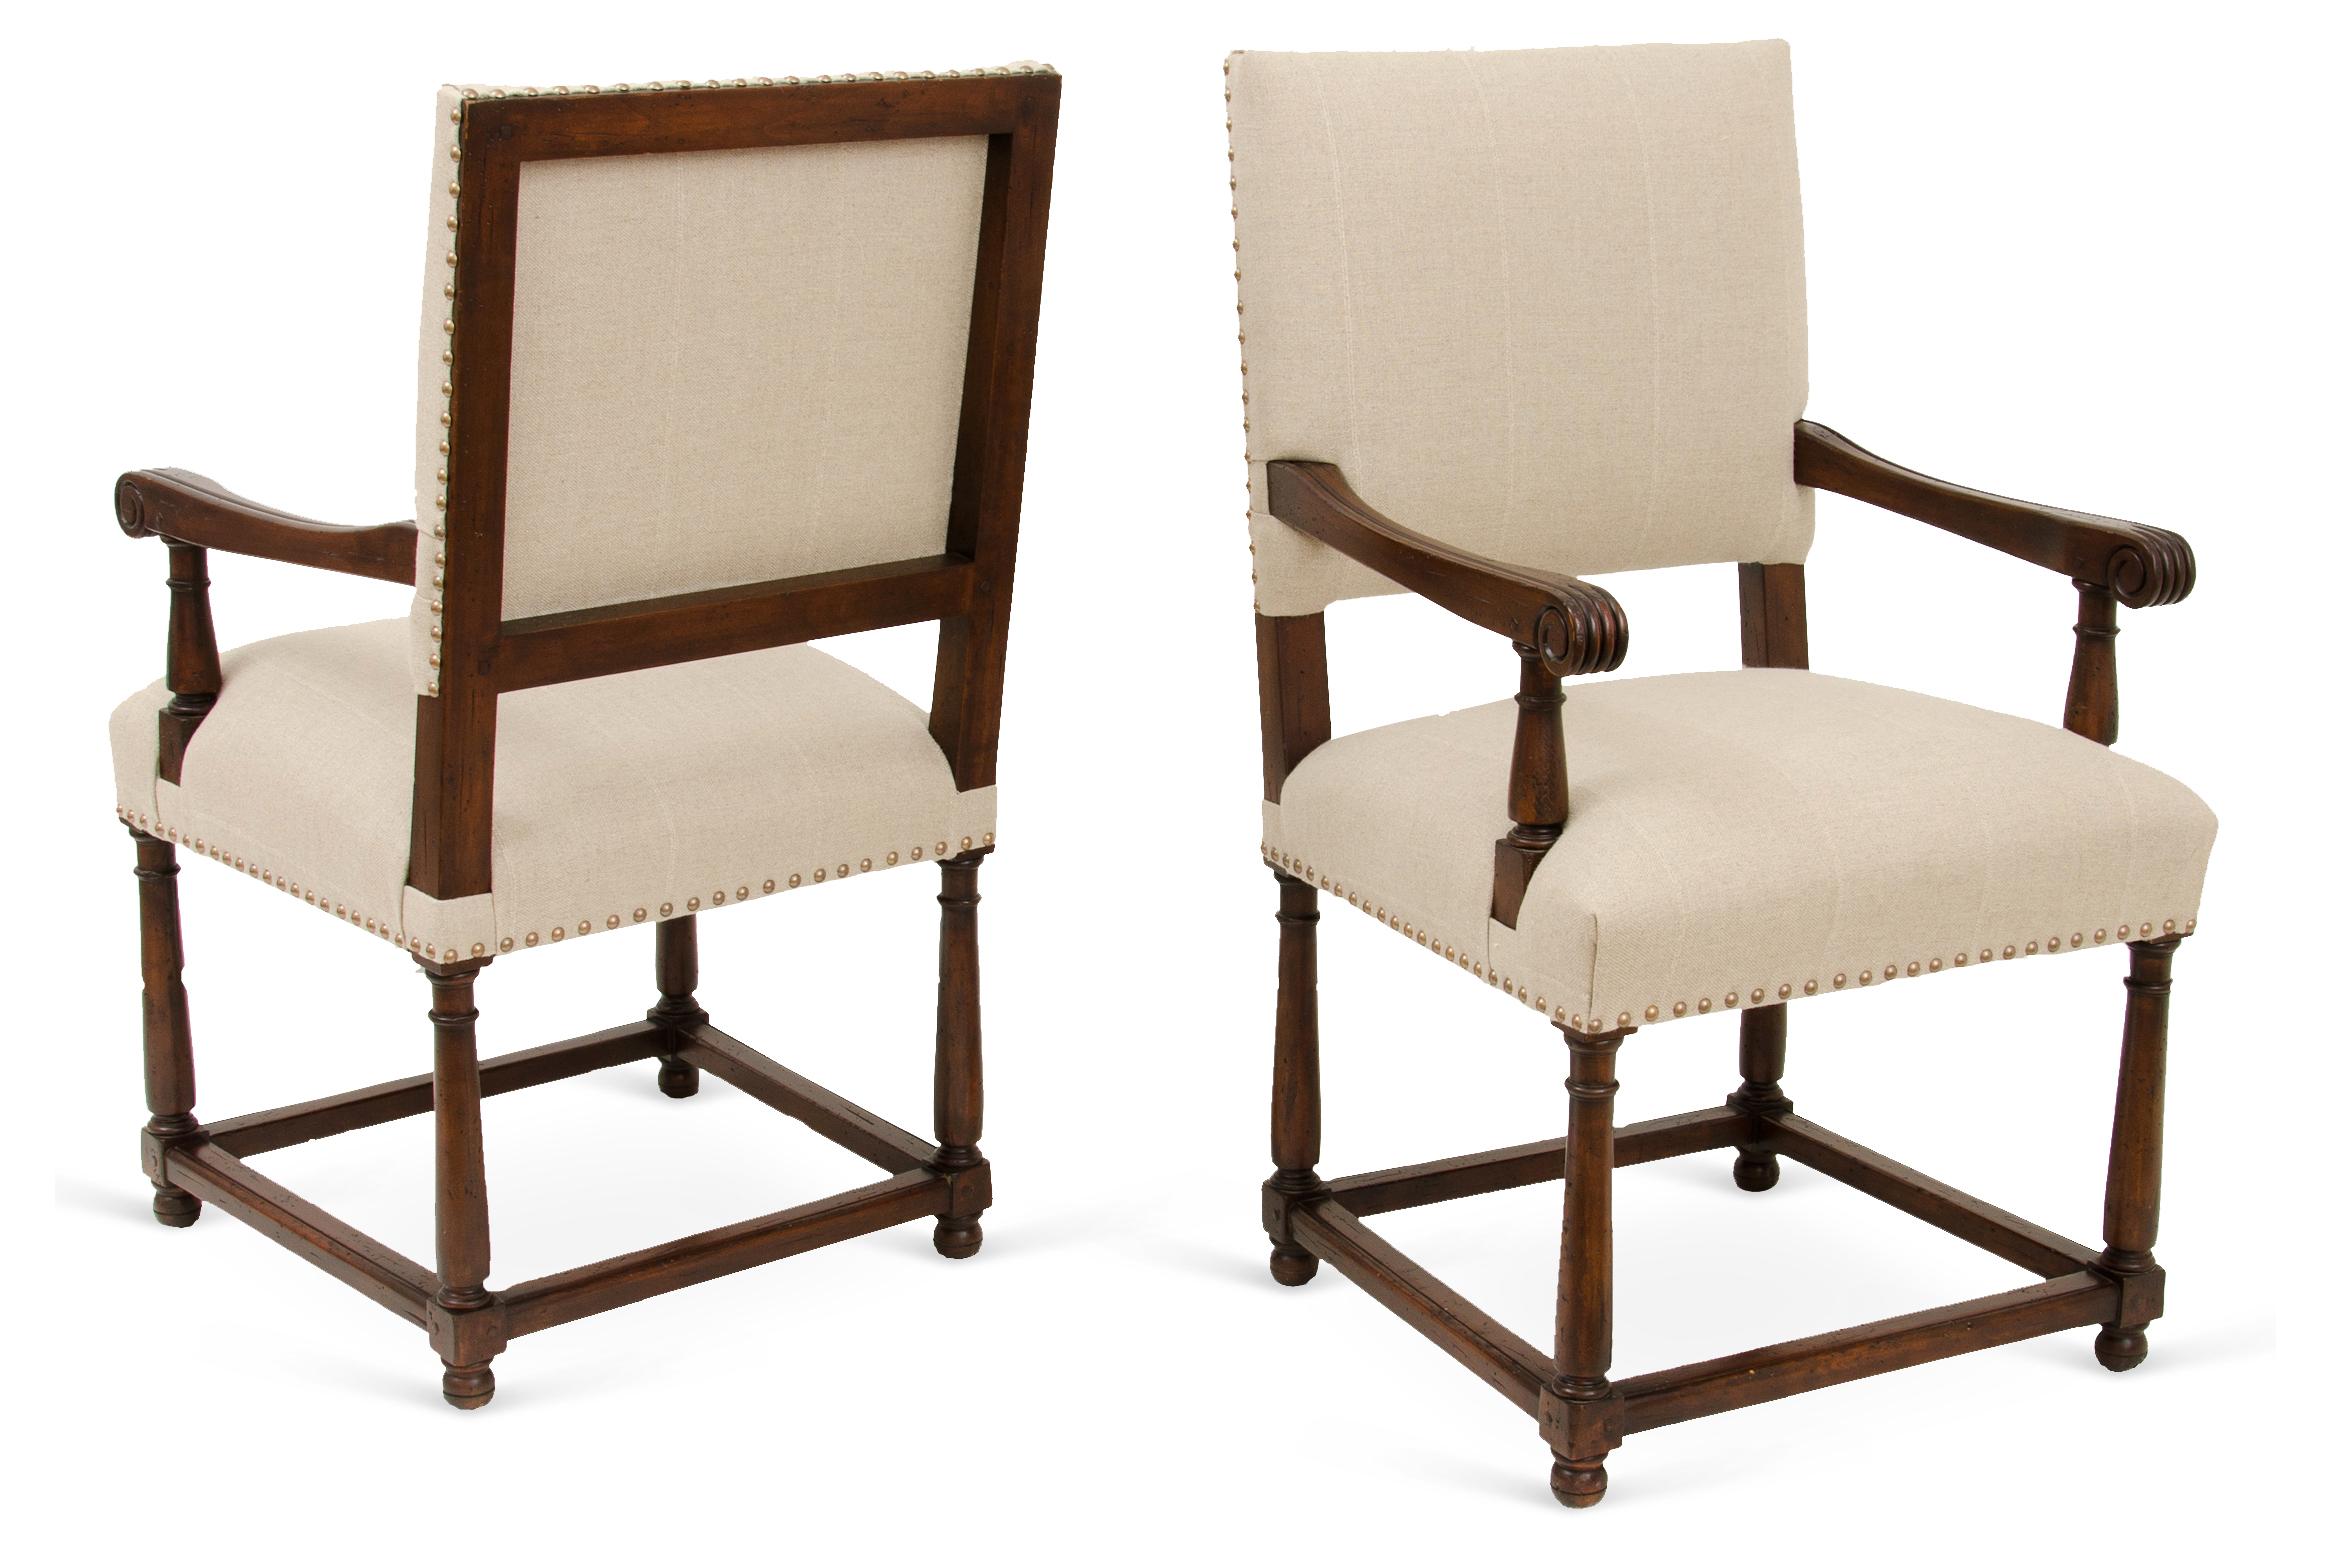 This hand-crafted armchair is an XVIII century reproduction with hand-turned legs, traditional joinery,
and an antiqued walnut finish. Custom sizes and finishes available. 

 